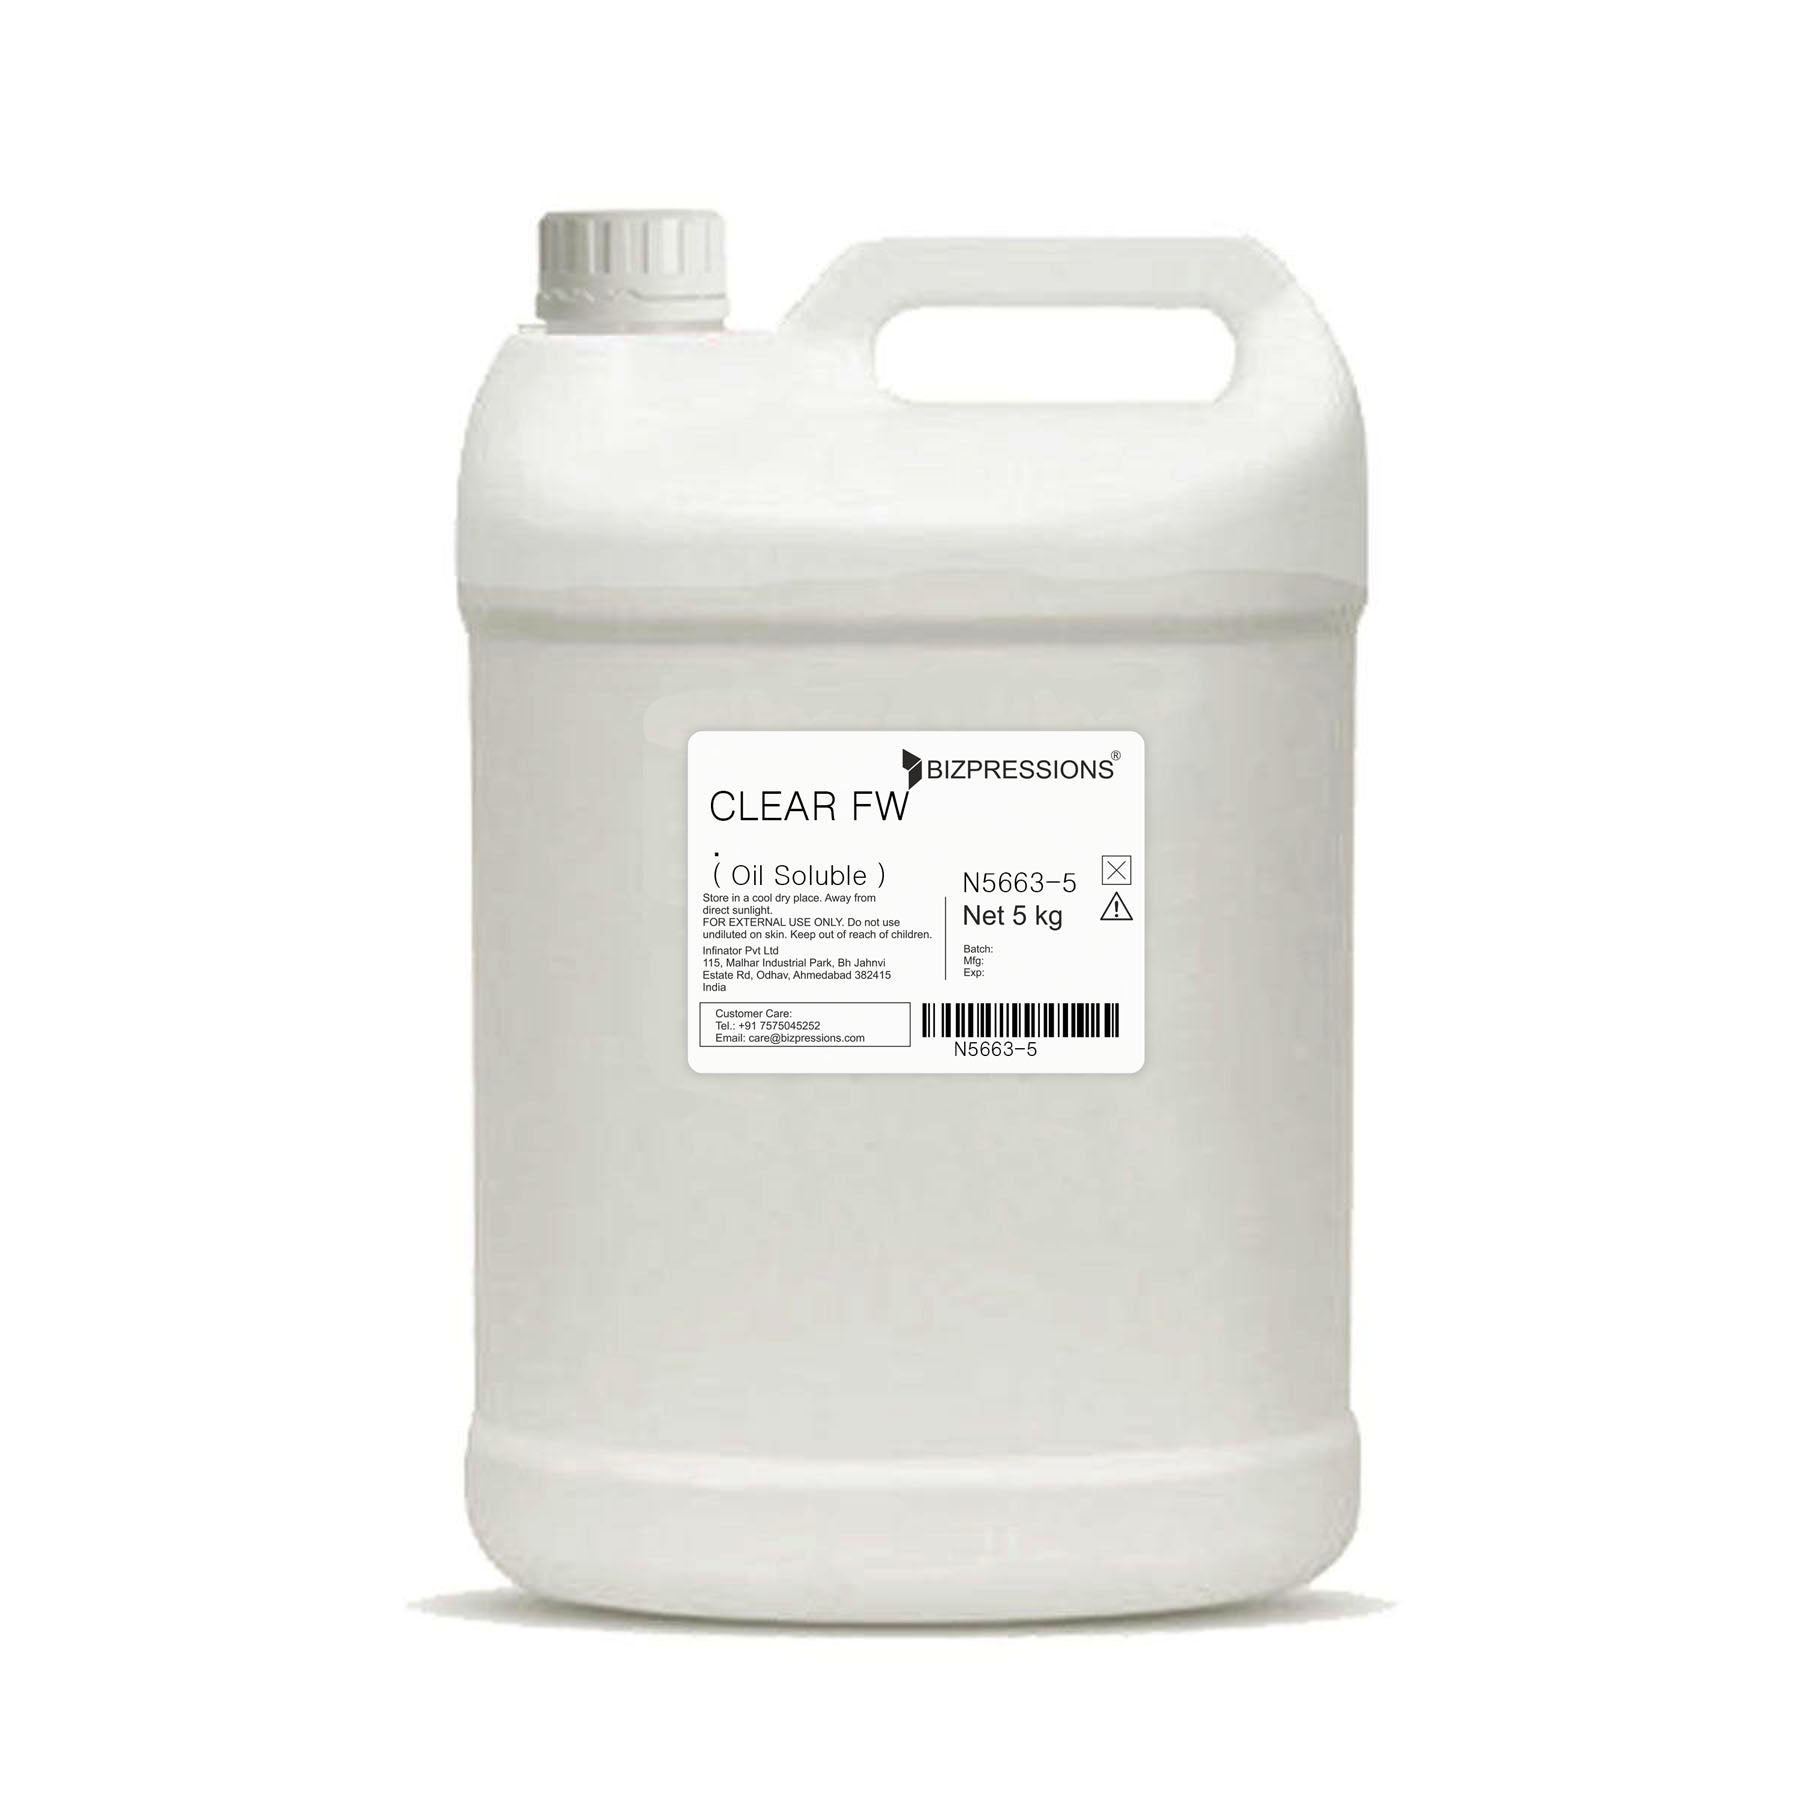 CLEAR FW - Fragrance ( Oil Soluble ) - 5 kg